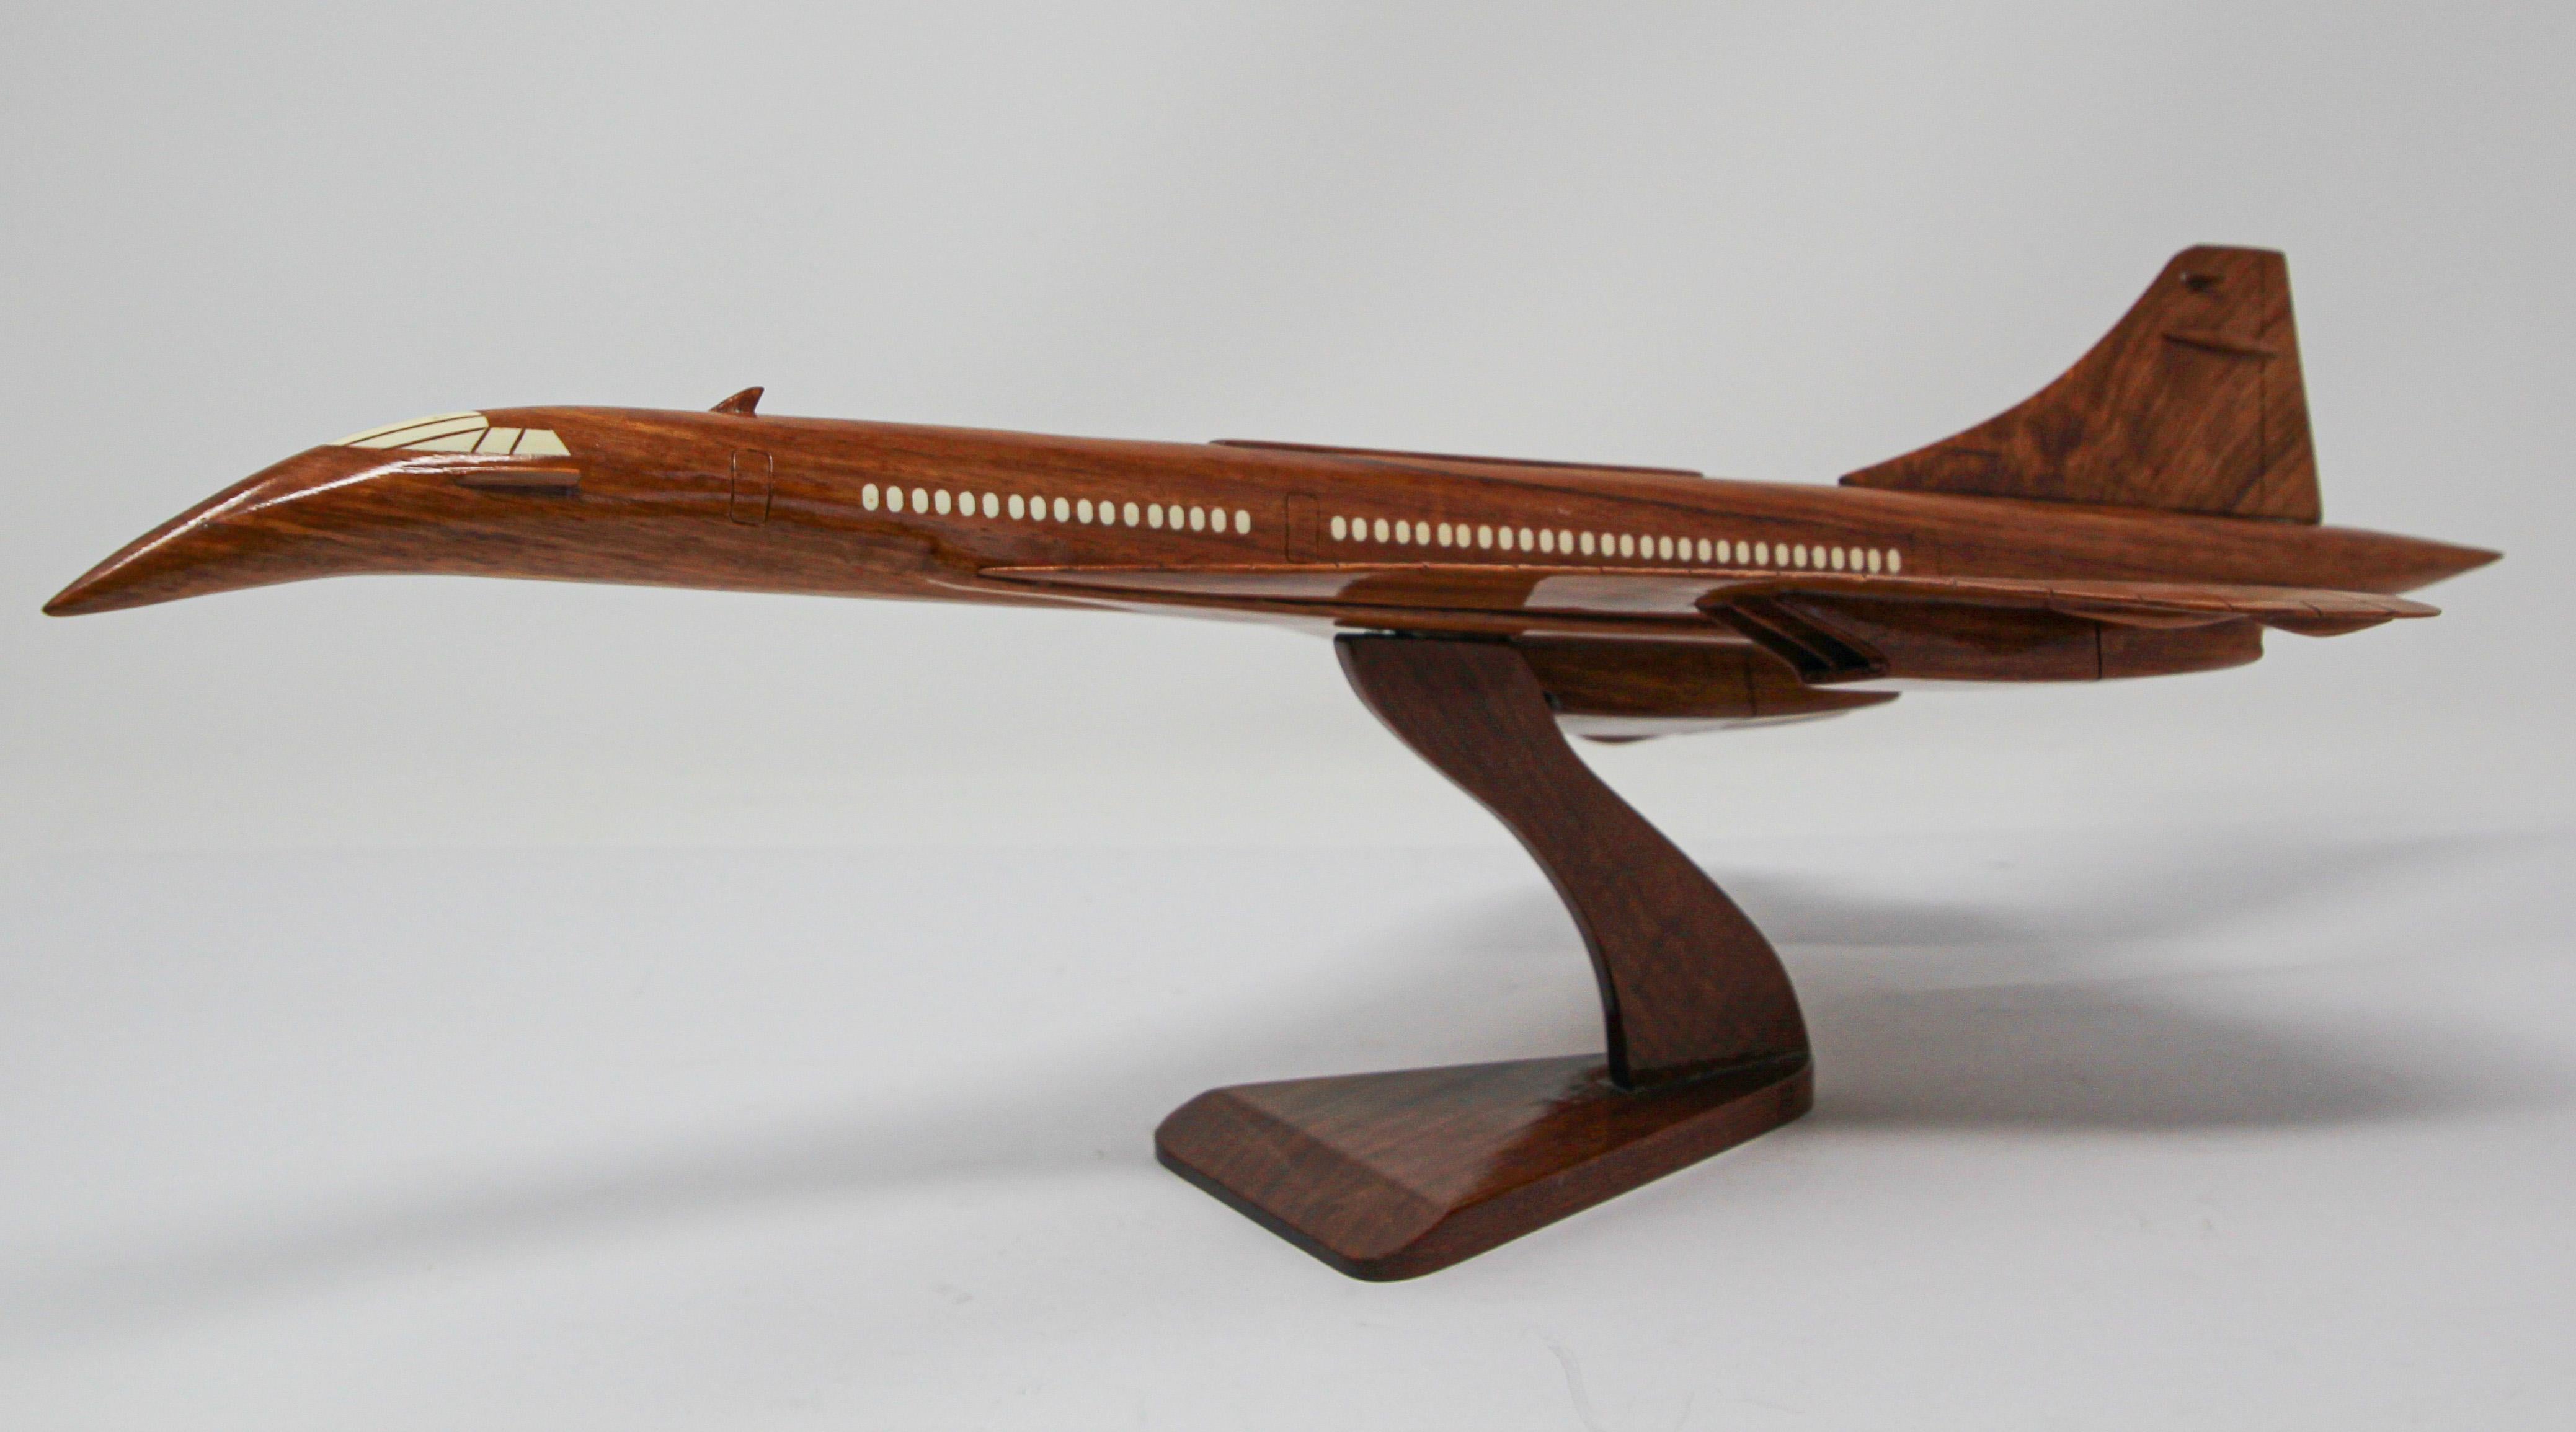 Organic Modern Wood Model of the Concorde Supersonic Aircraft